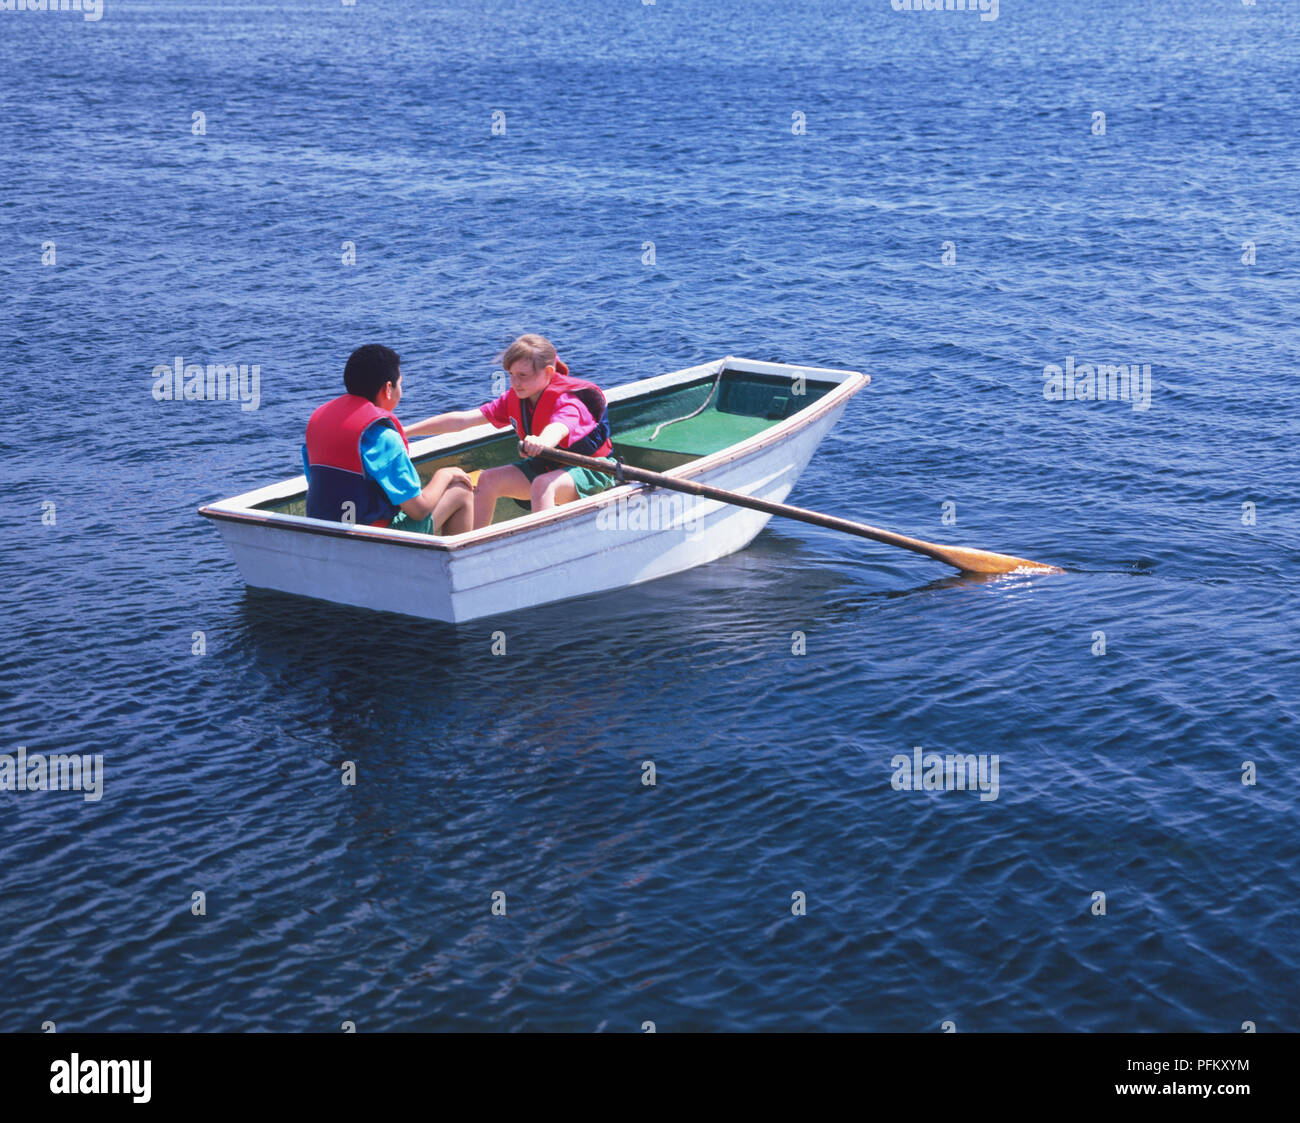 A boy and girl wearing life jackets while rowing a small boat on the open water Stock Photo